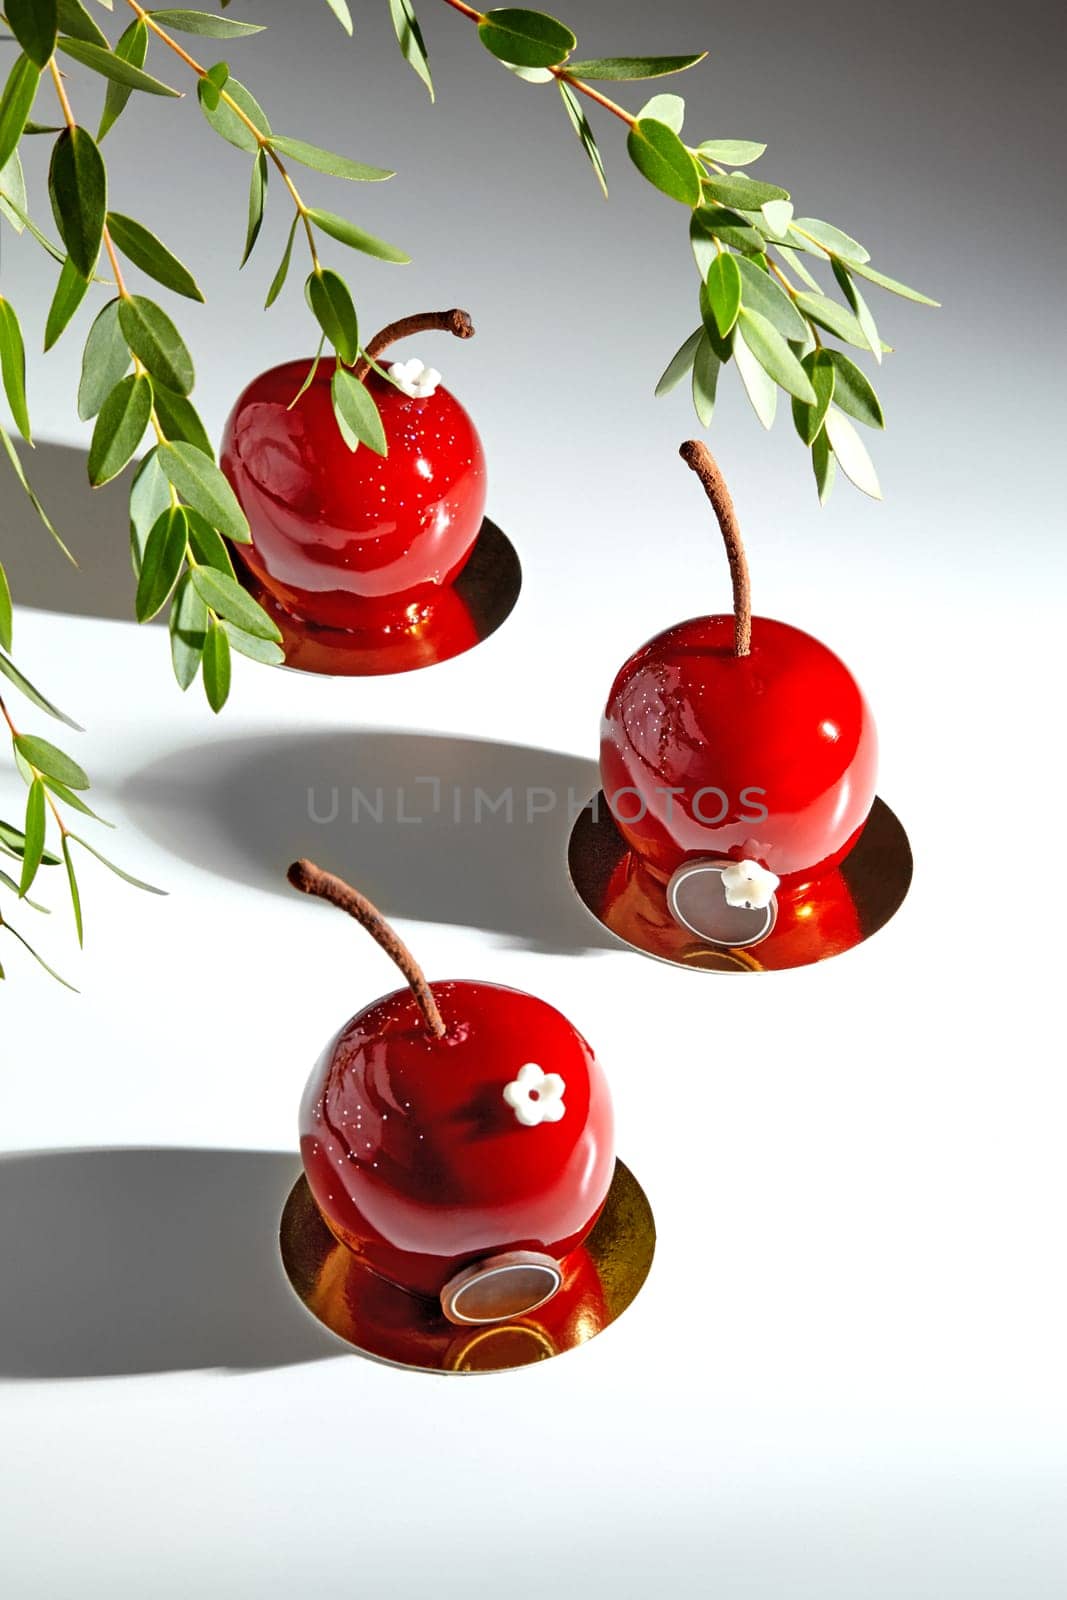 Evocative of cherry orchard, artisanal pastries with red glossy glaze and chocolate stems displayed on reflective gold cardboards under green tree branches. Artisan desserts concept